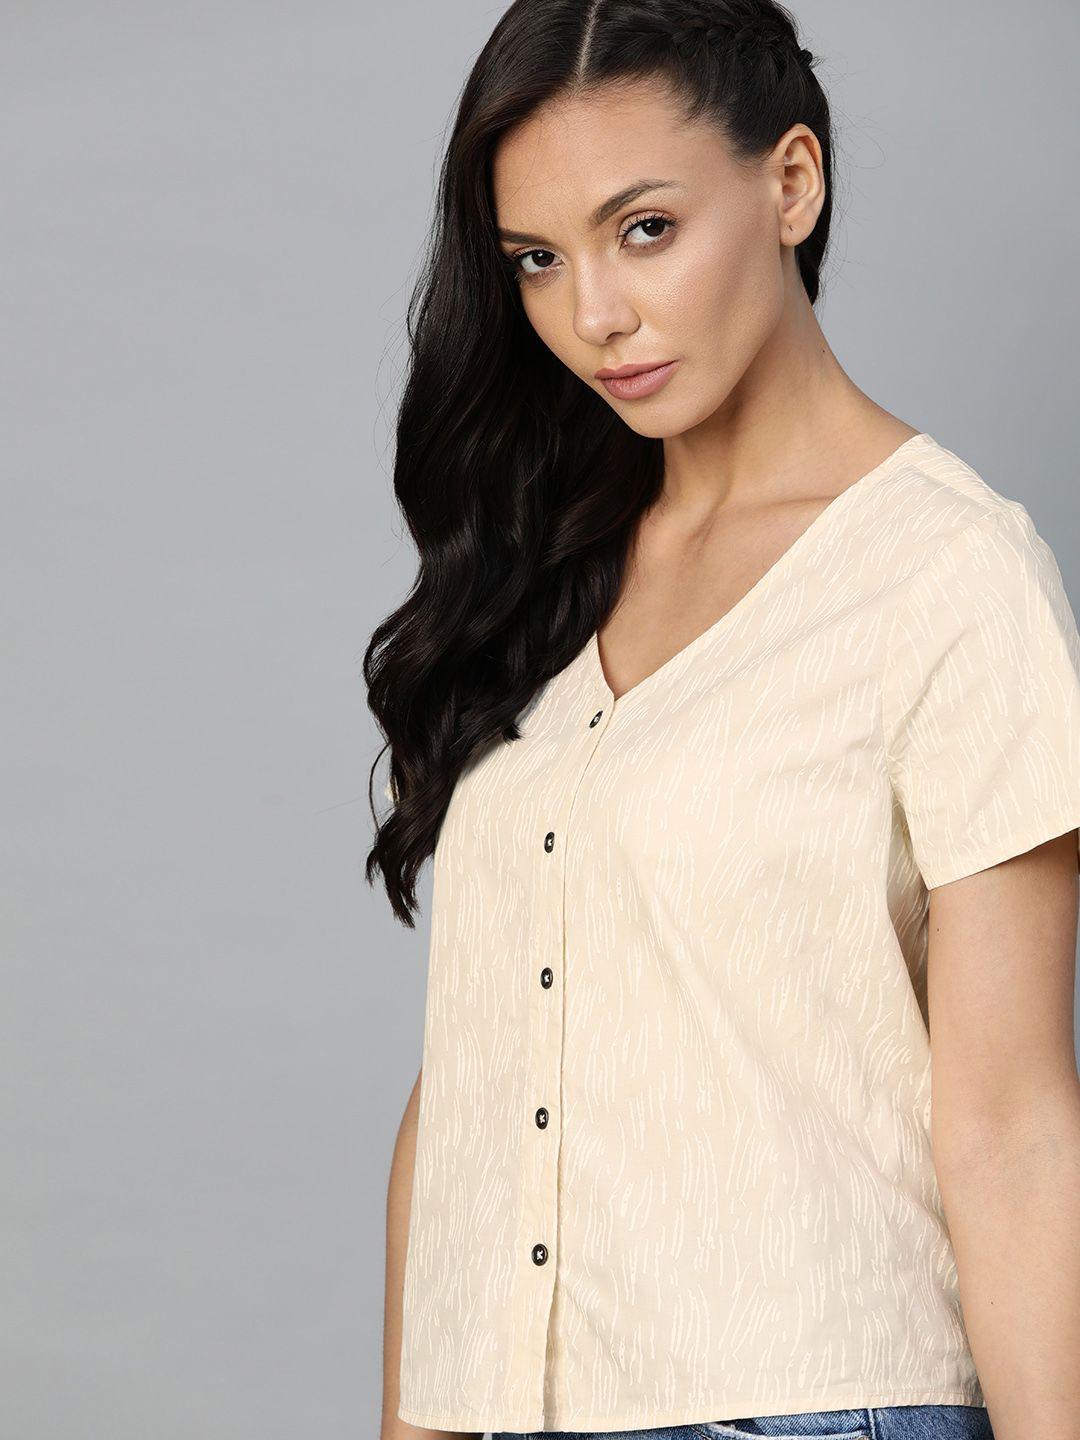 the roadster lifestyle co beige & white pure cotton printed regular top